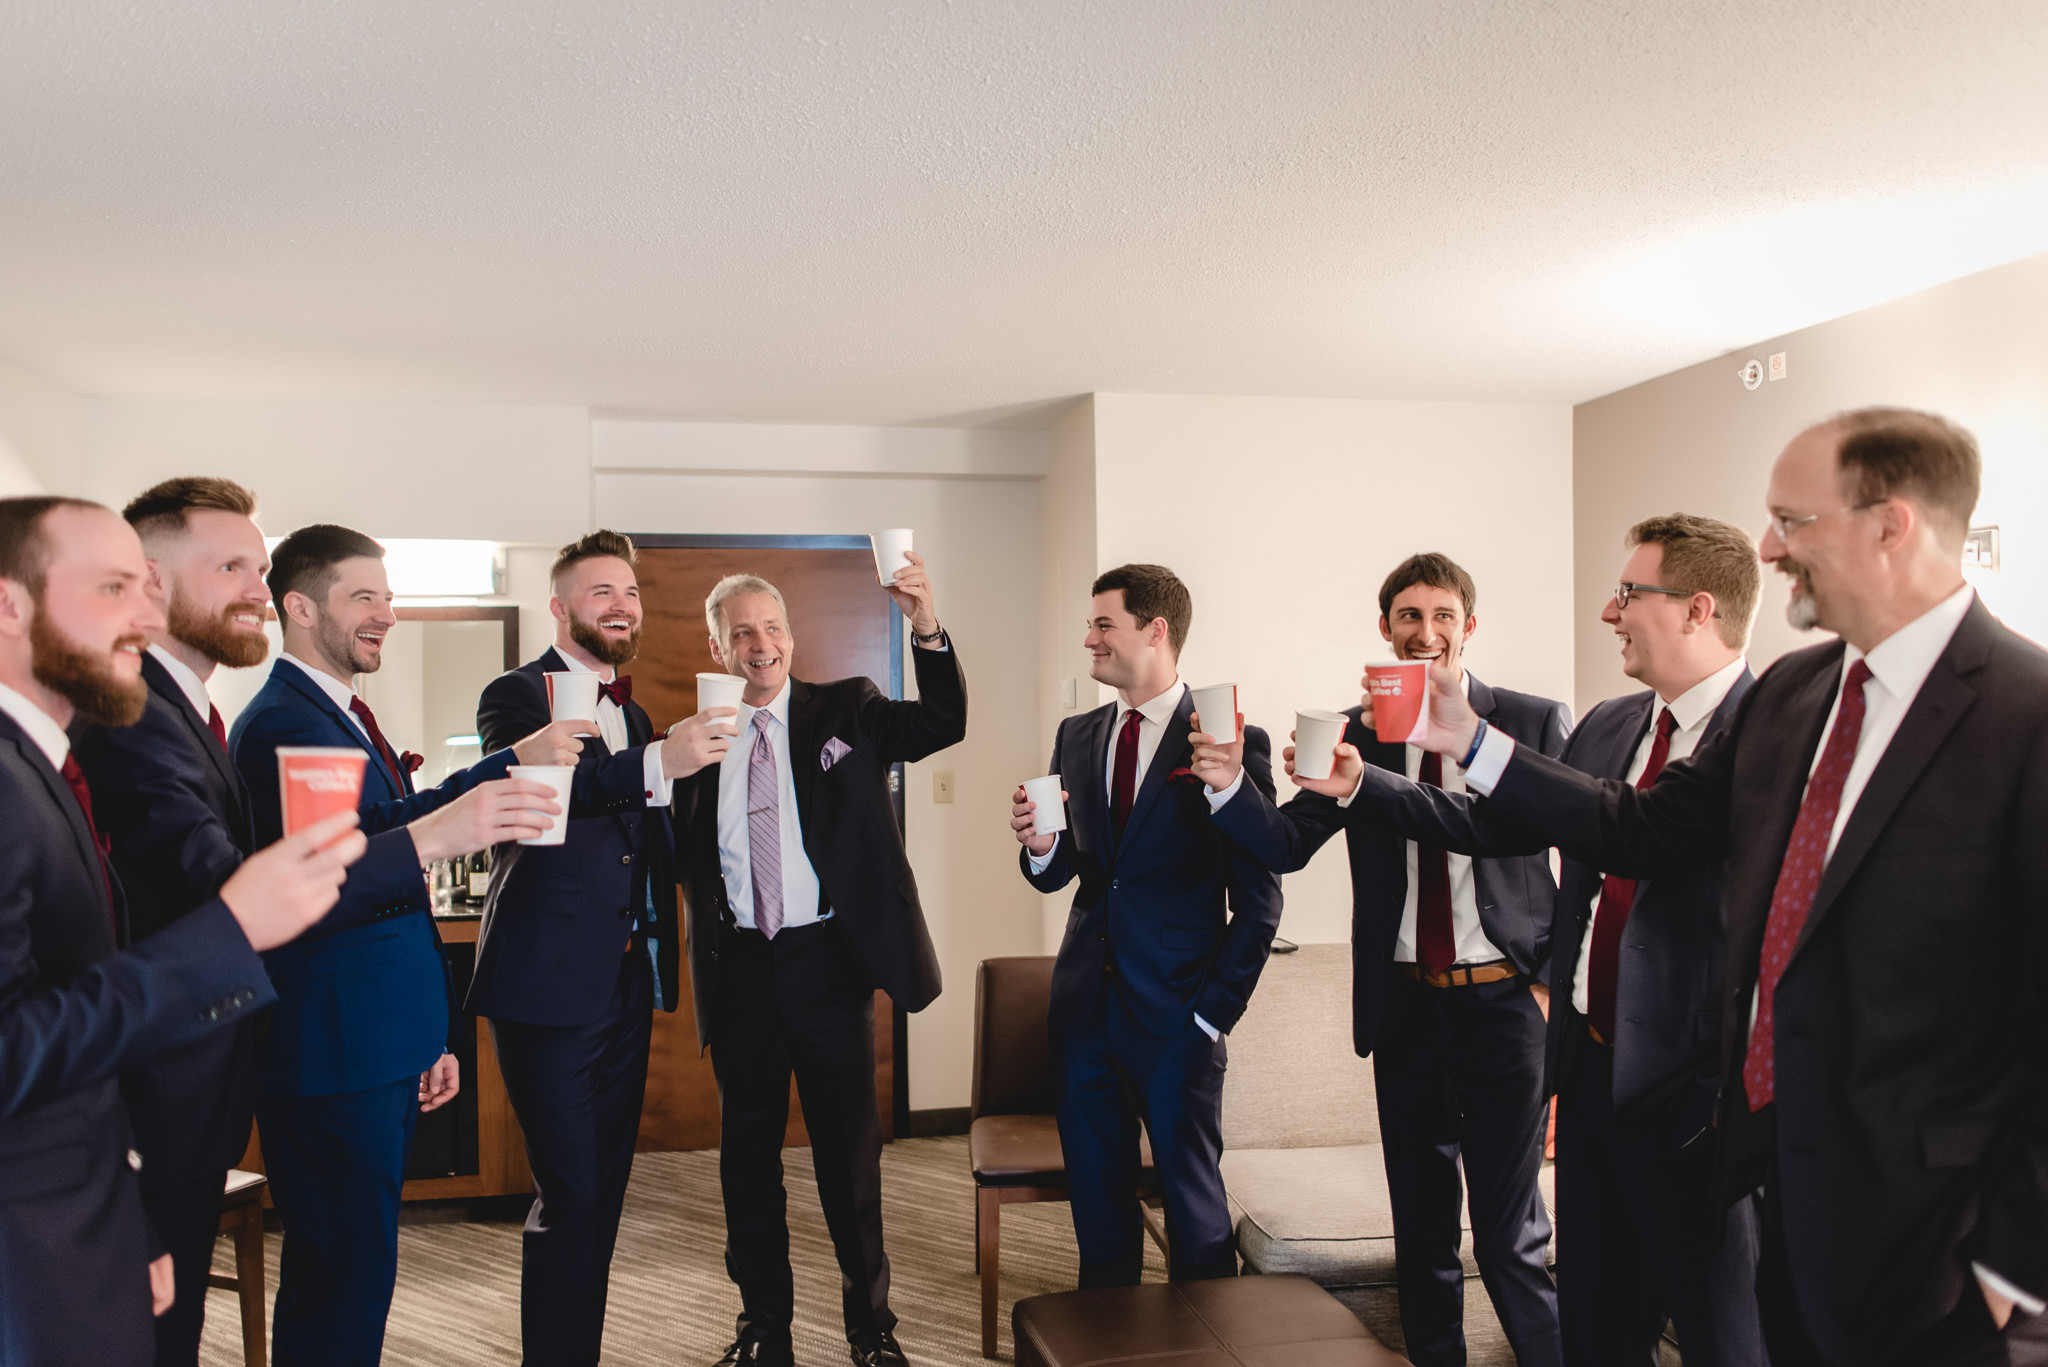 Groomsmen and fathers toast the groom before heading to the Chadwick for his wedding